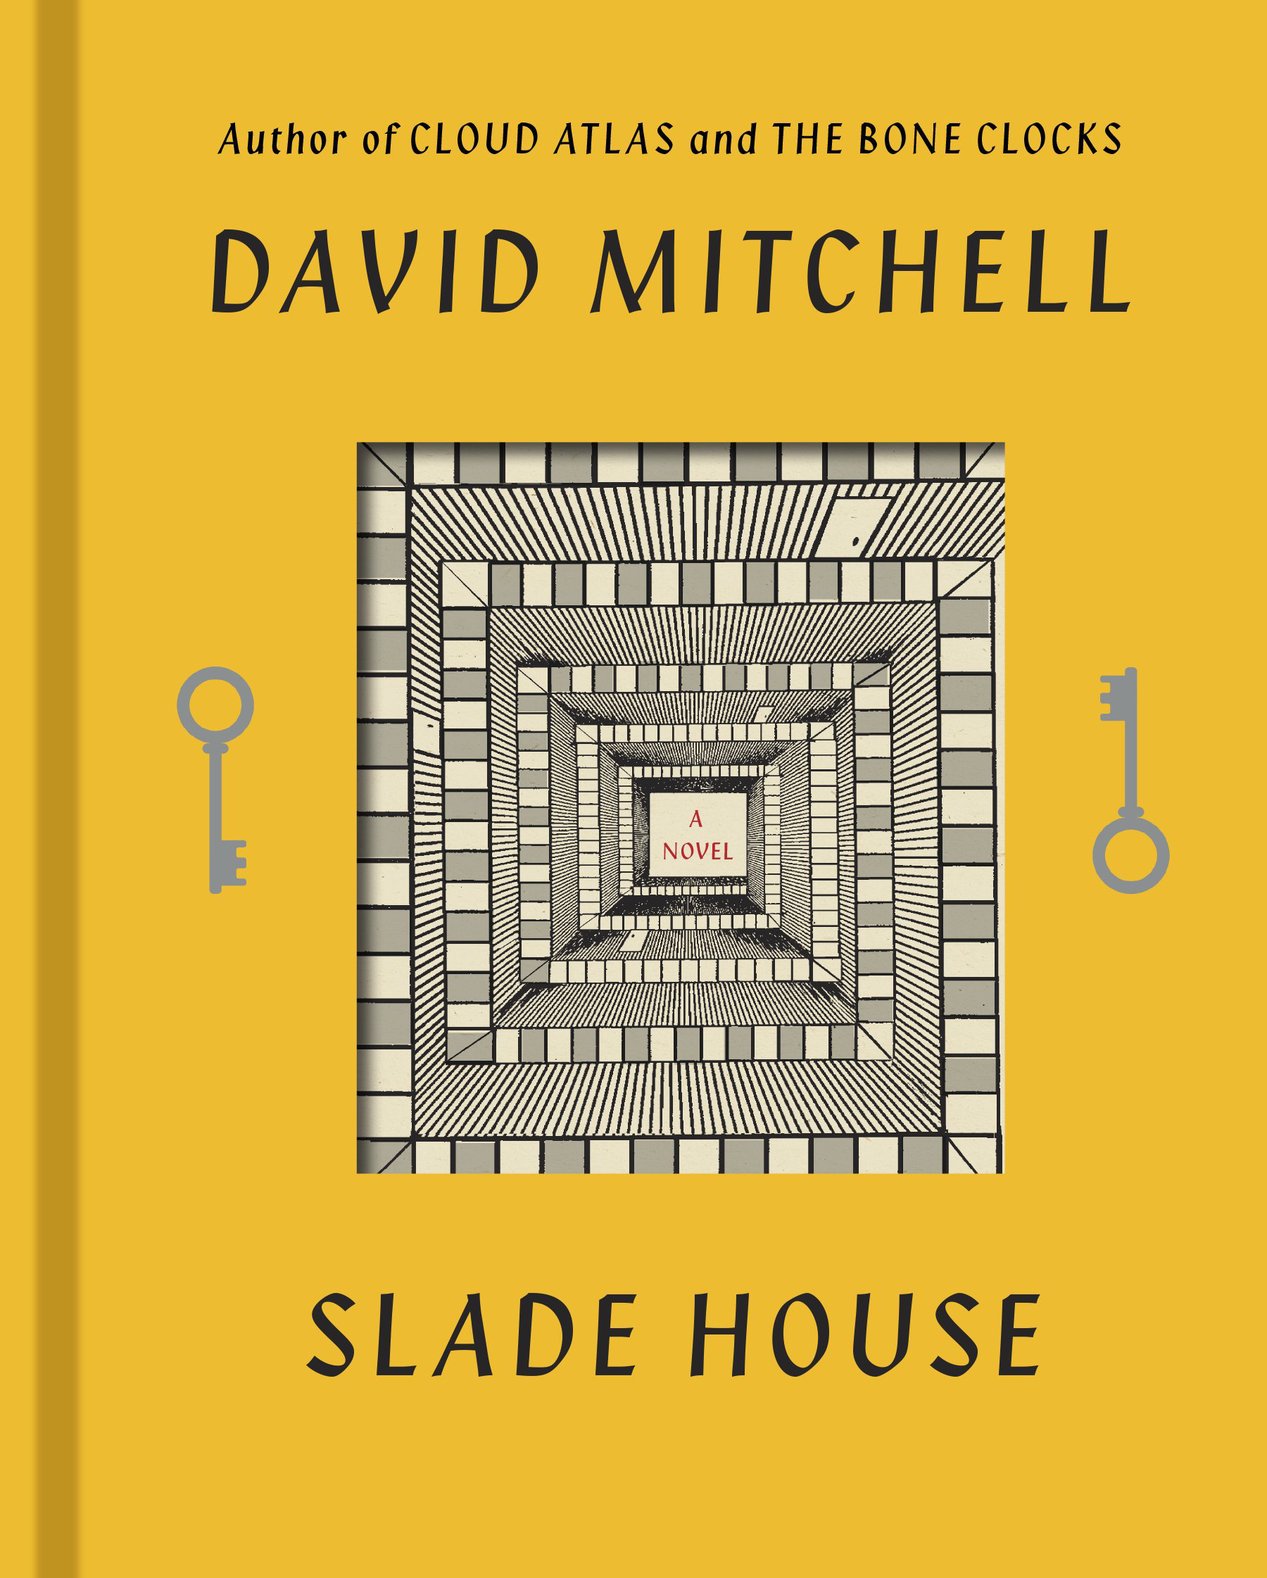 Slade House (2015) by David Mitchell